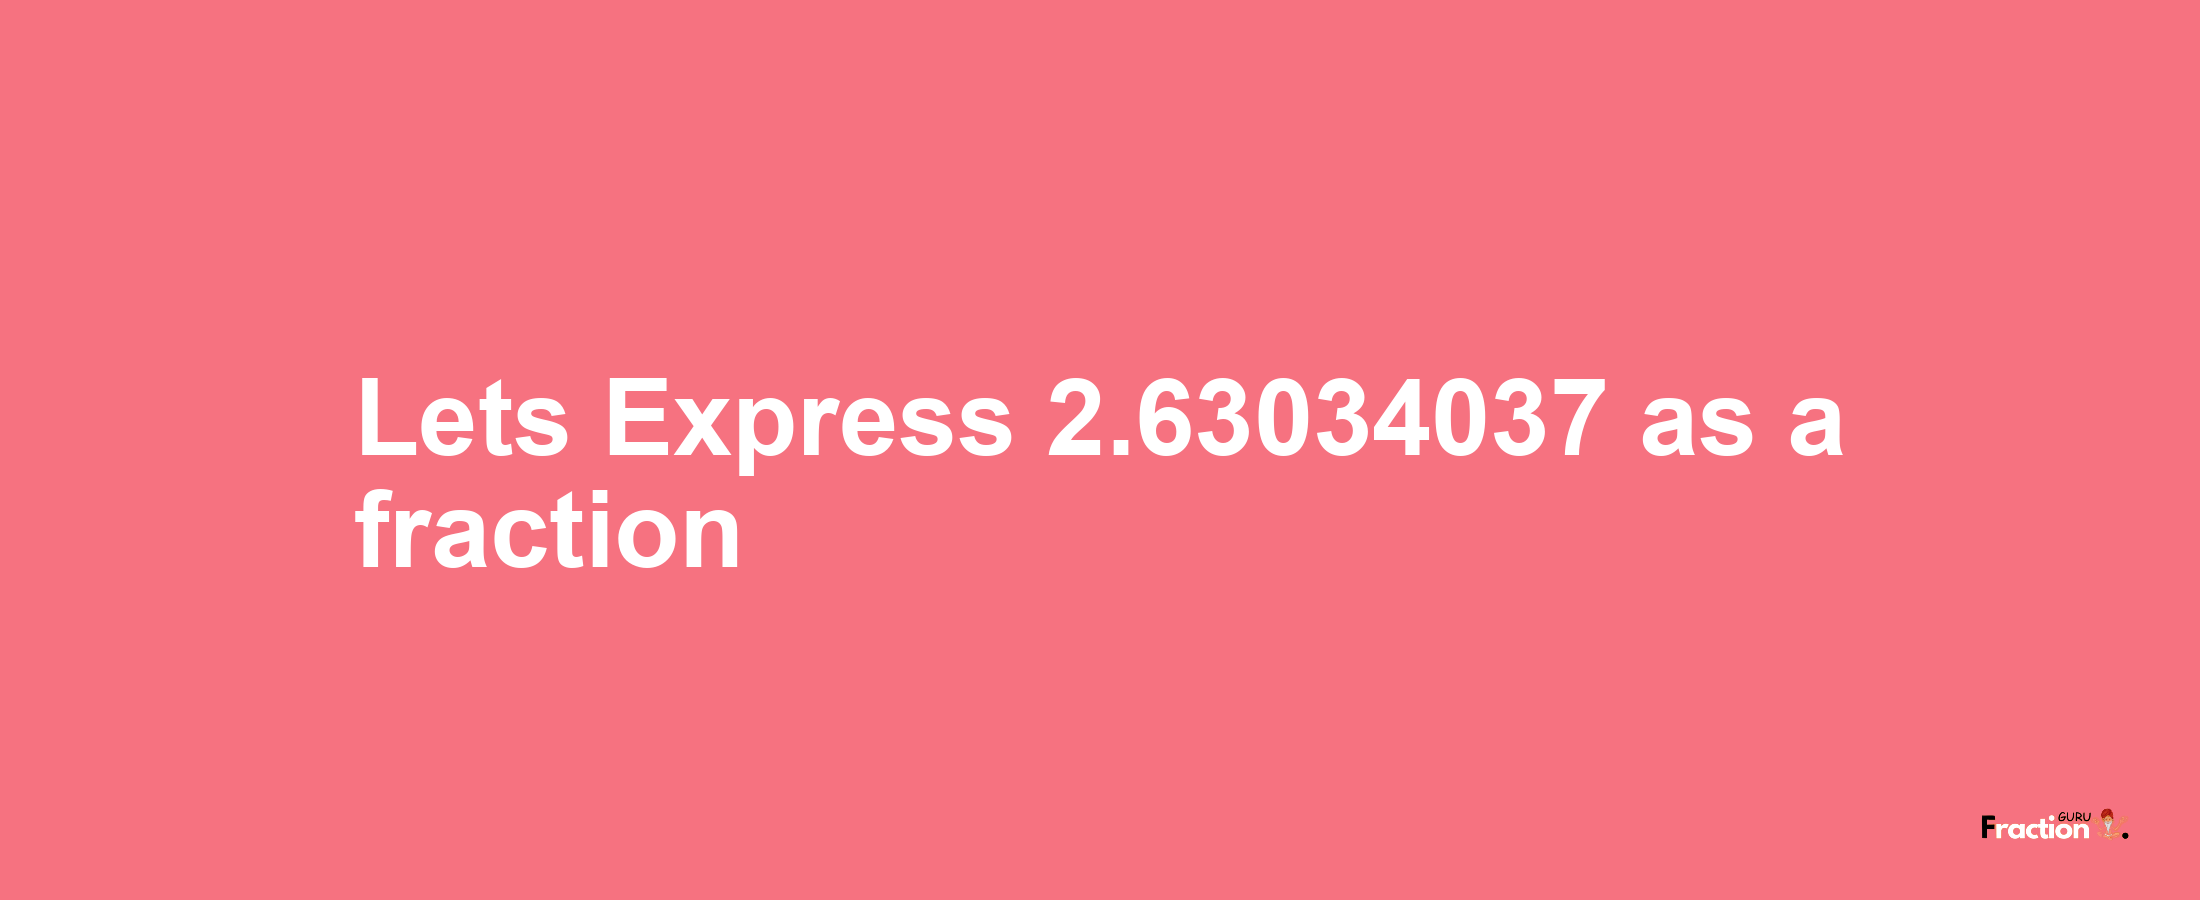 Lets Express 2.63034037 as afraction